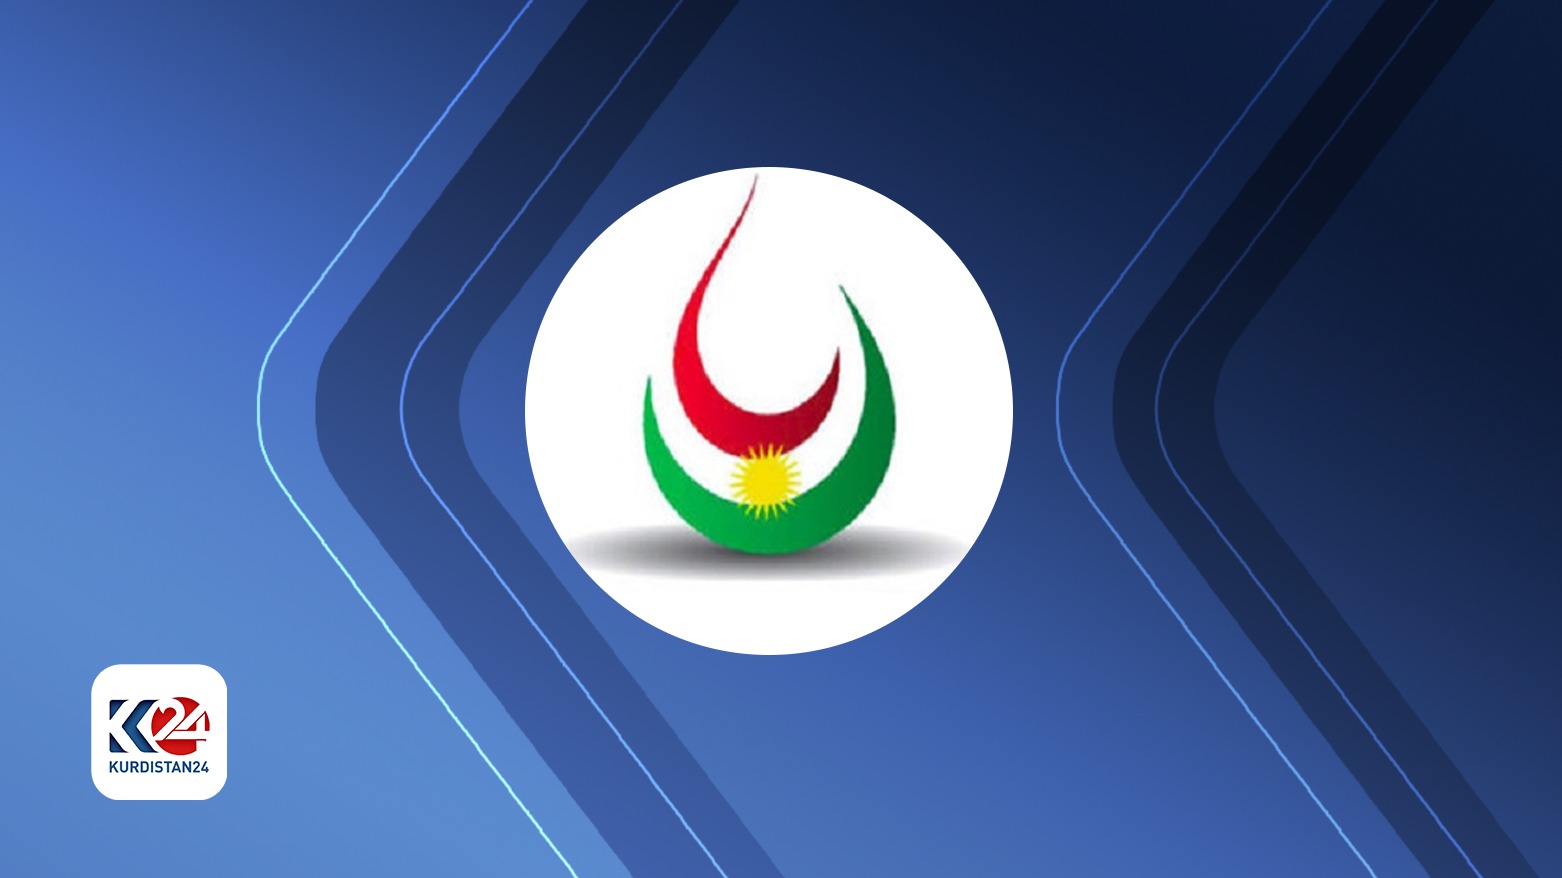 The logo of KRG Ministry of Natural Resources. (Photo: Kurdistan24)